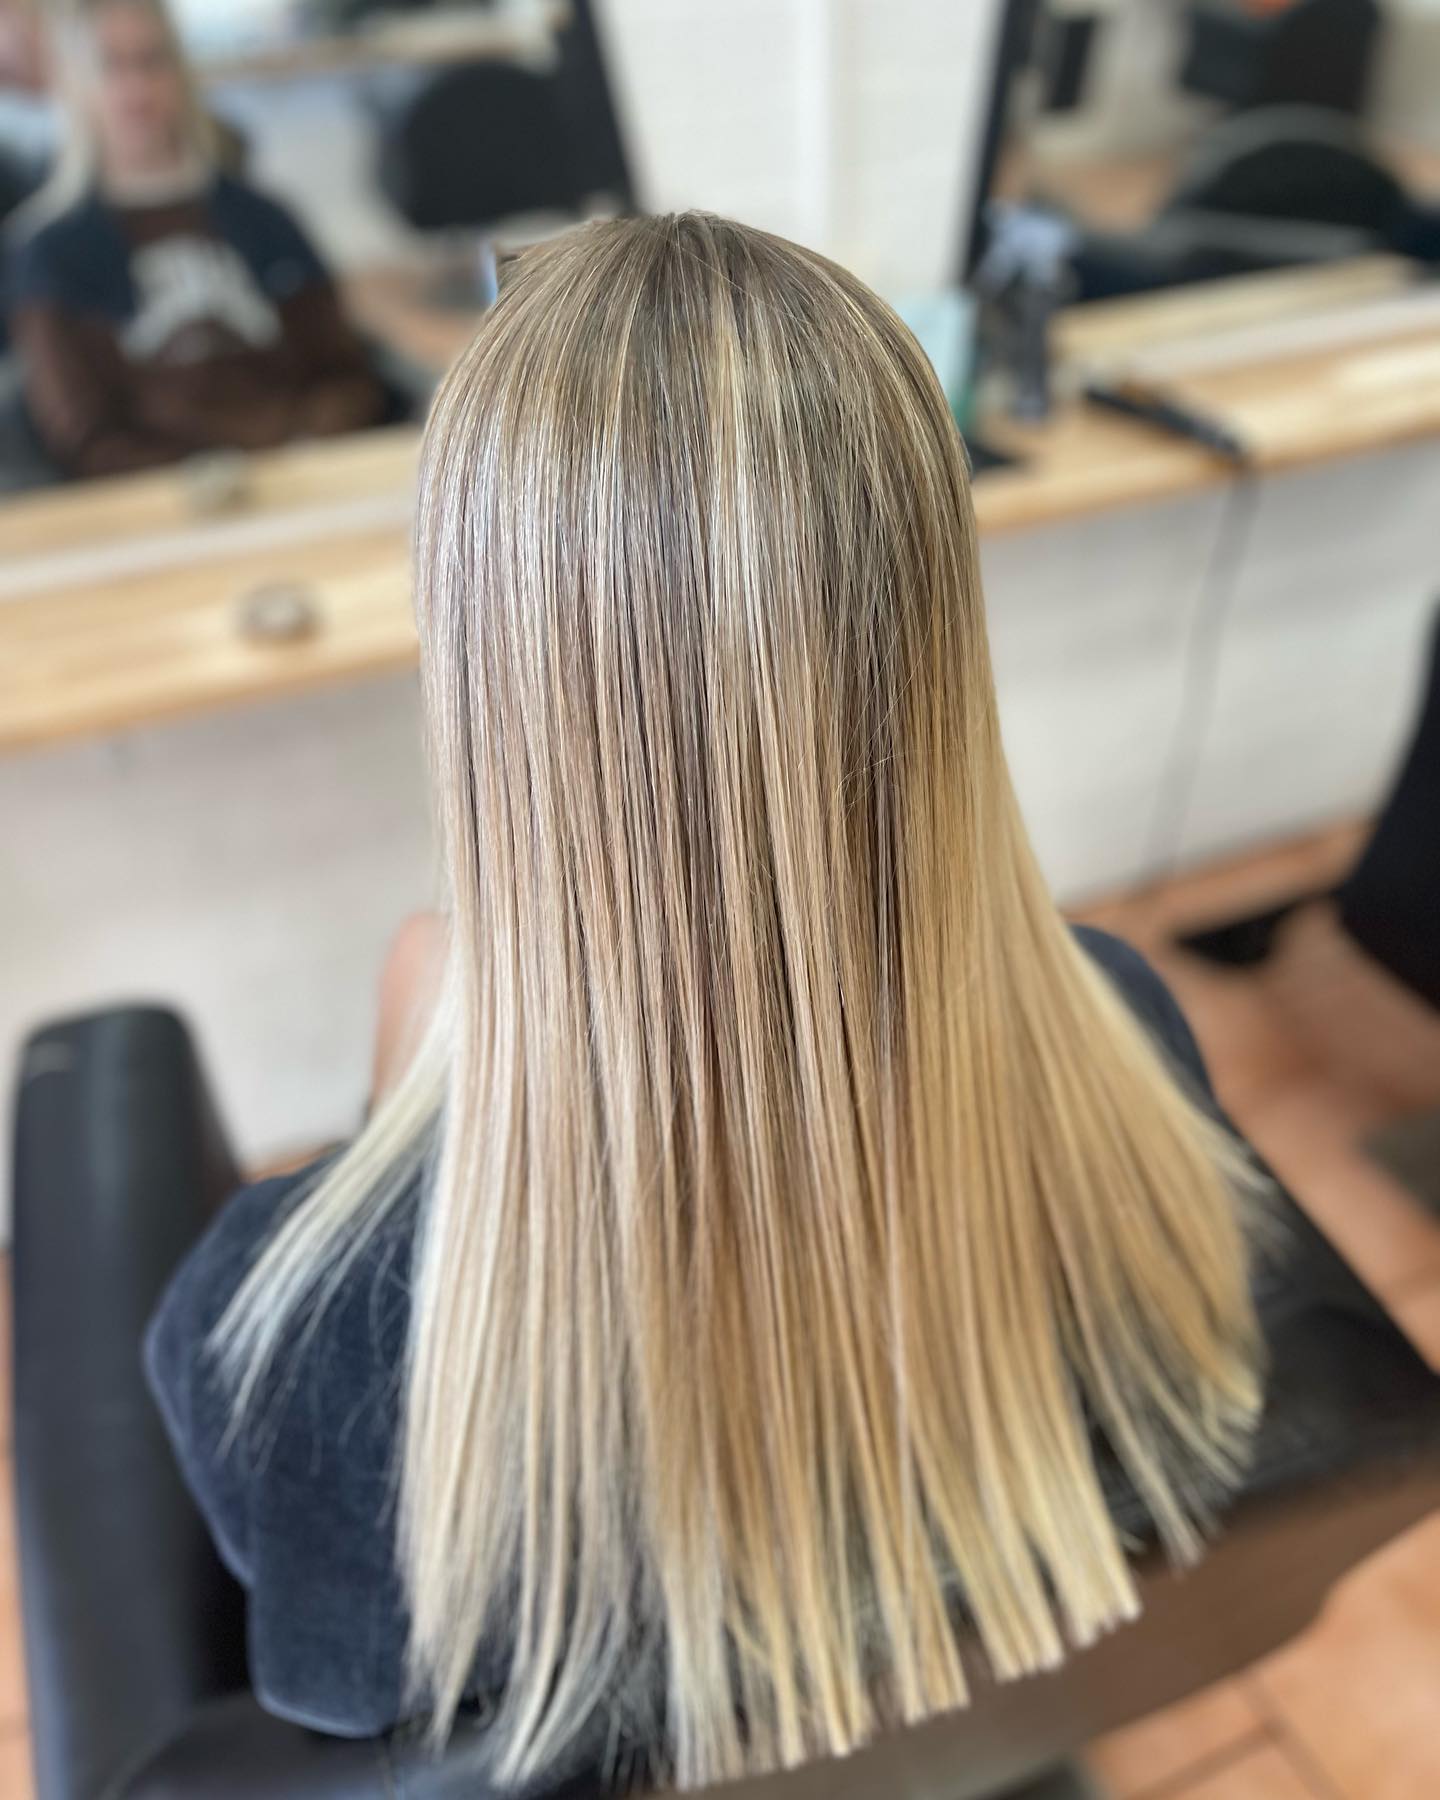 Professional Hairdresser Dyeing Hair of Her Client — Local Hair Salon In Unanderra